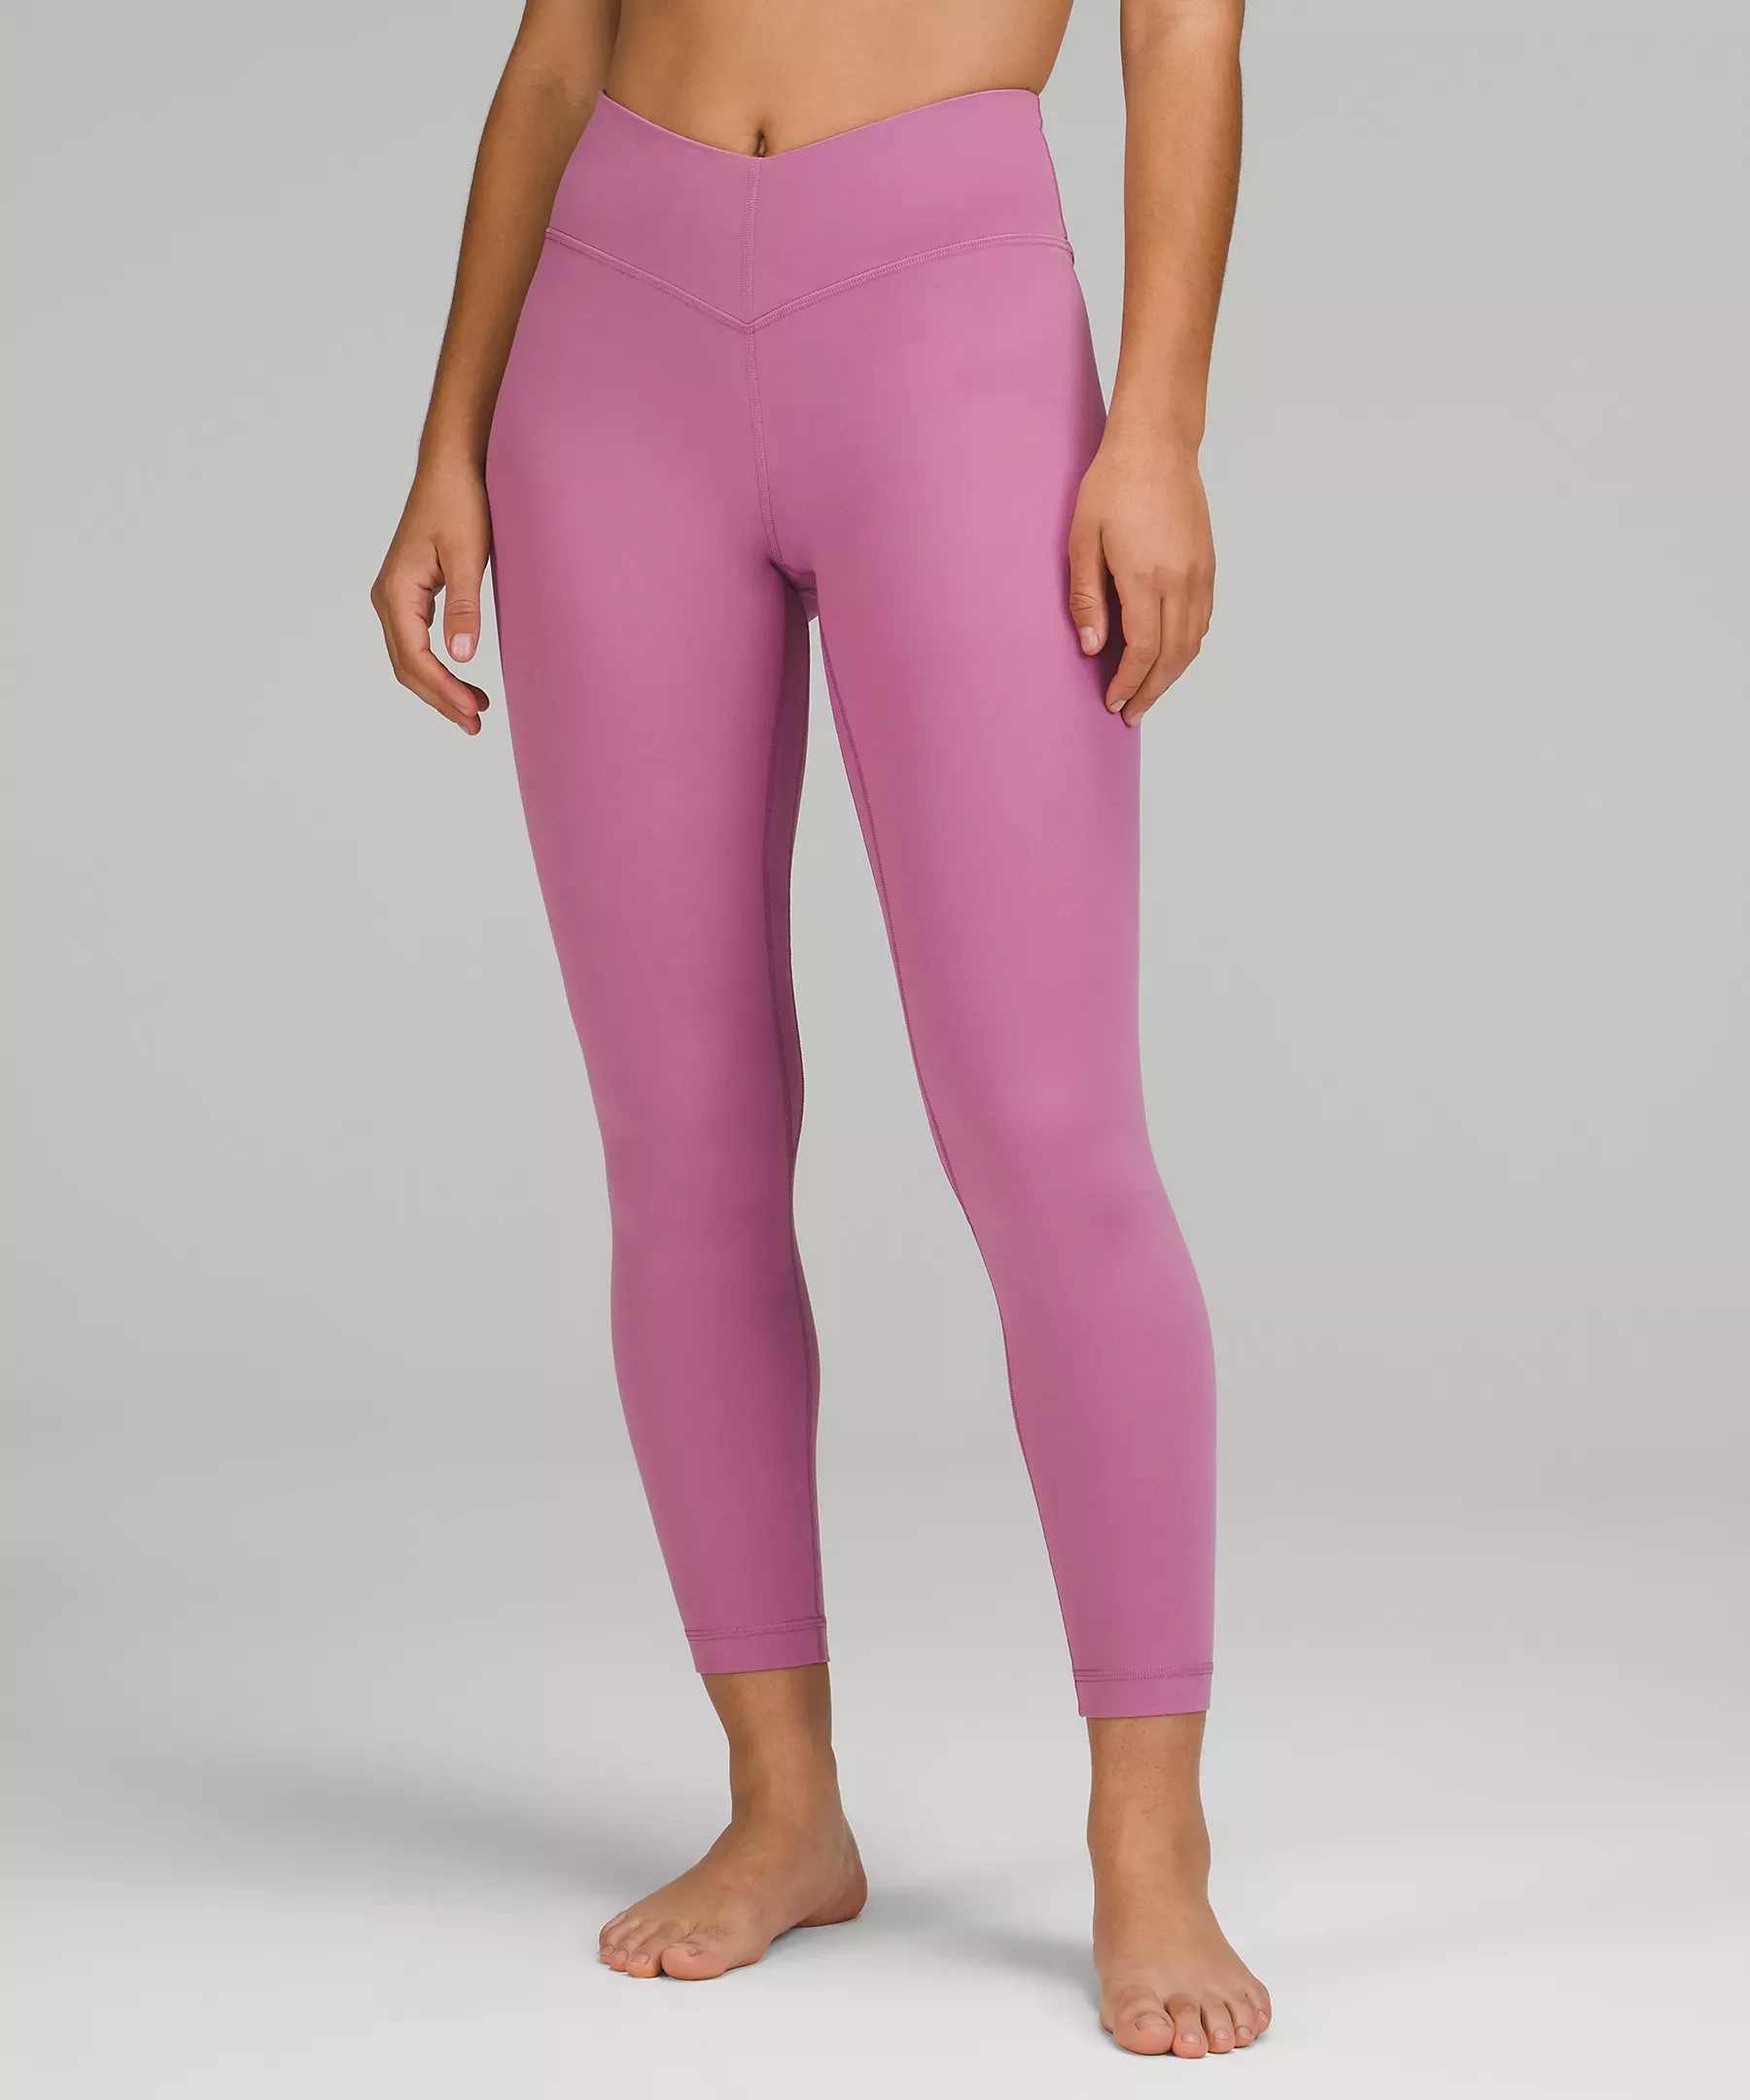 NWT Lululemon Align Pant Size 4 Pink Lychee 28 Double Lined Sold Out!